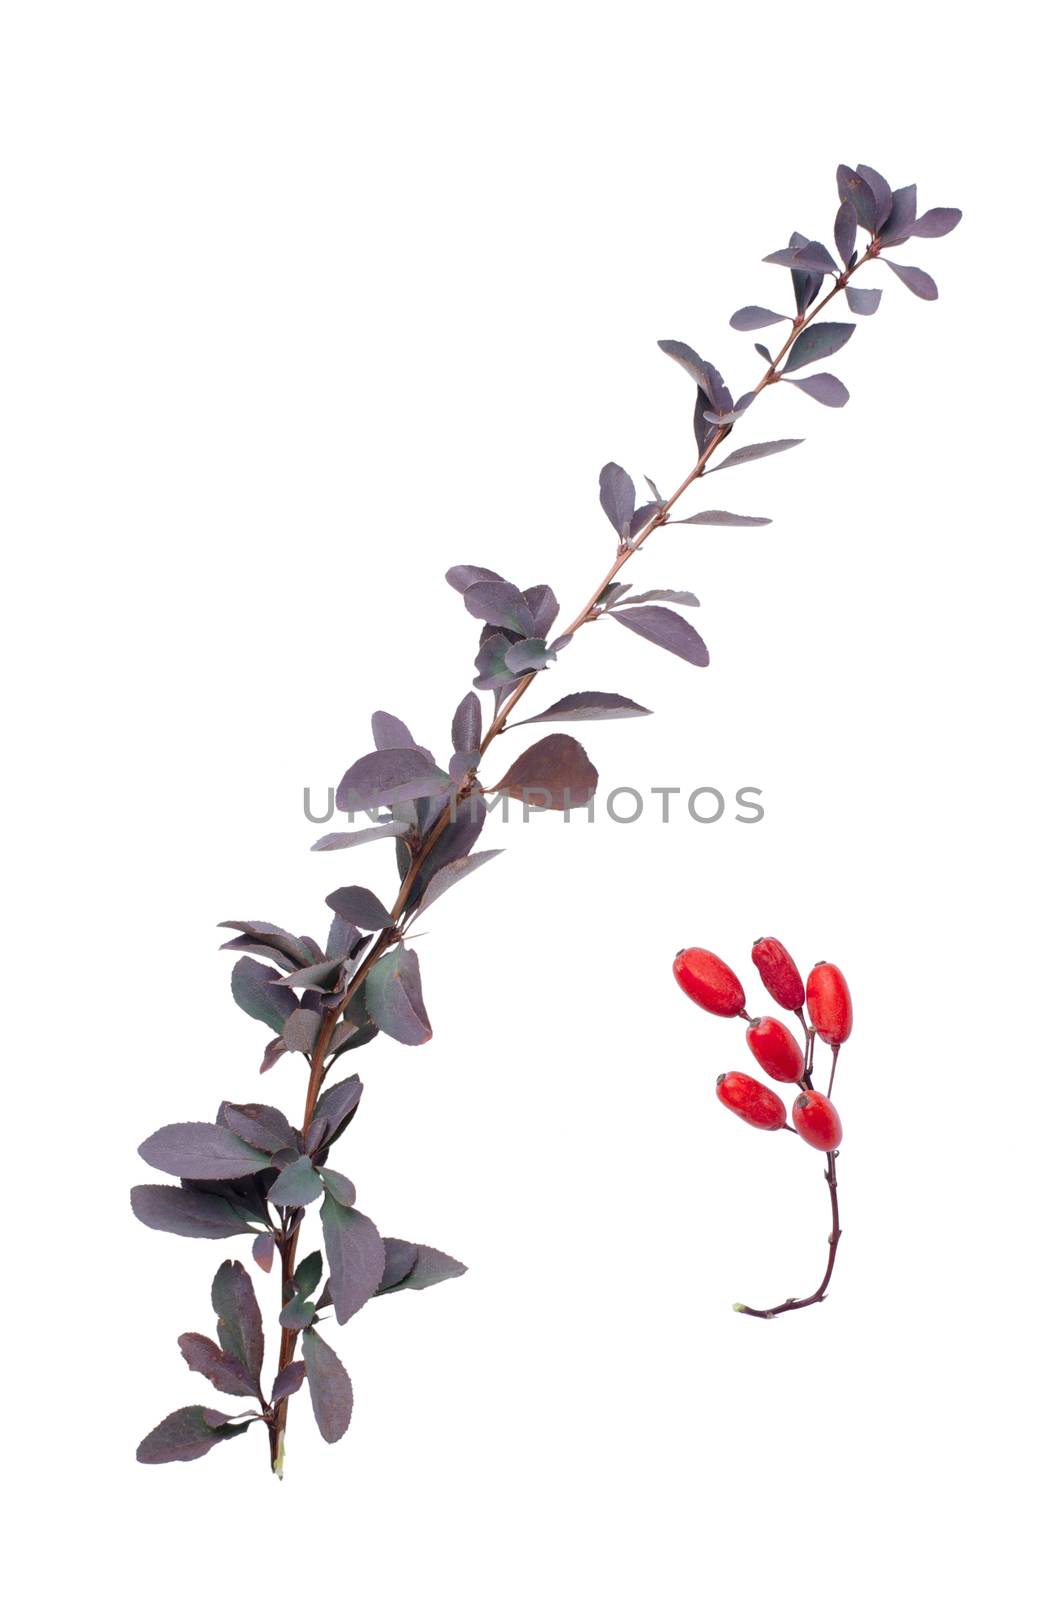 Berberis furit branch with red leaves and detail of fruit beside.